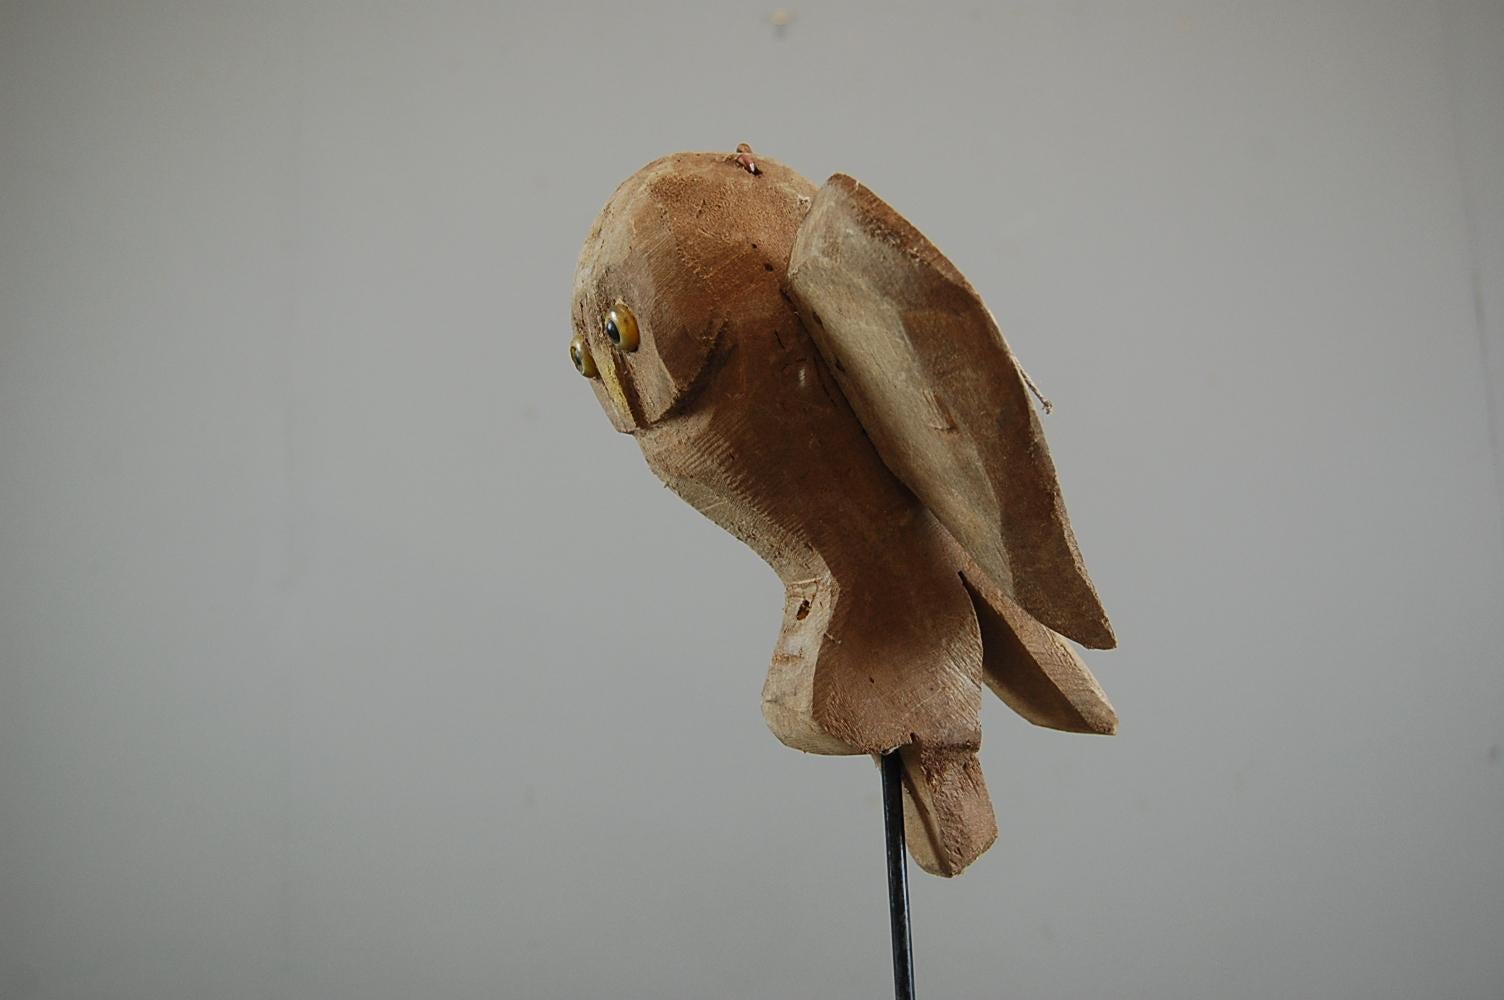 Primitive Owl decoy, removable wings, dry surface finish, original painted beak and glass eyes. France, circa 1930. Marked or signed BM.